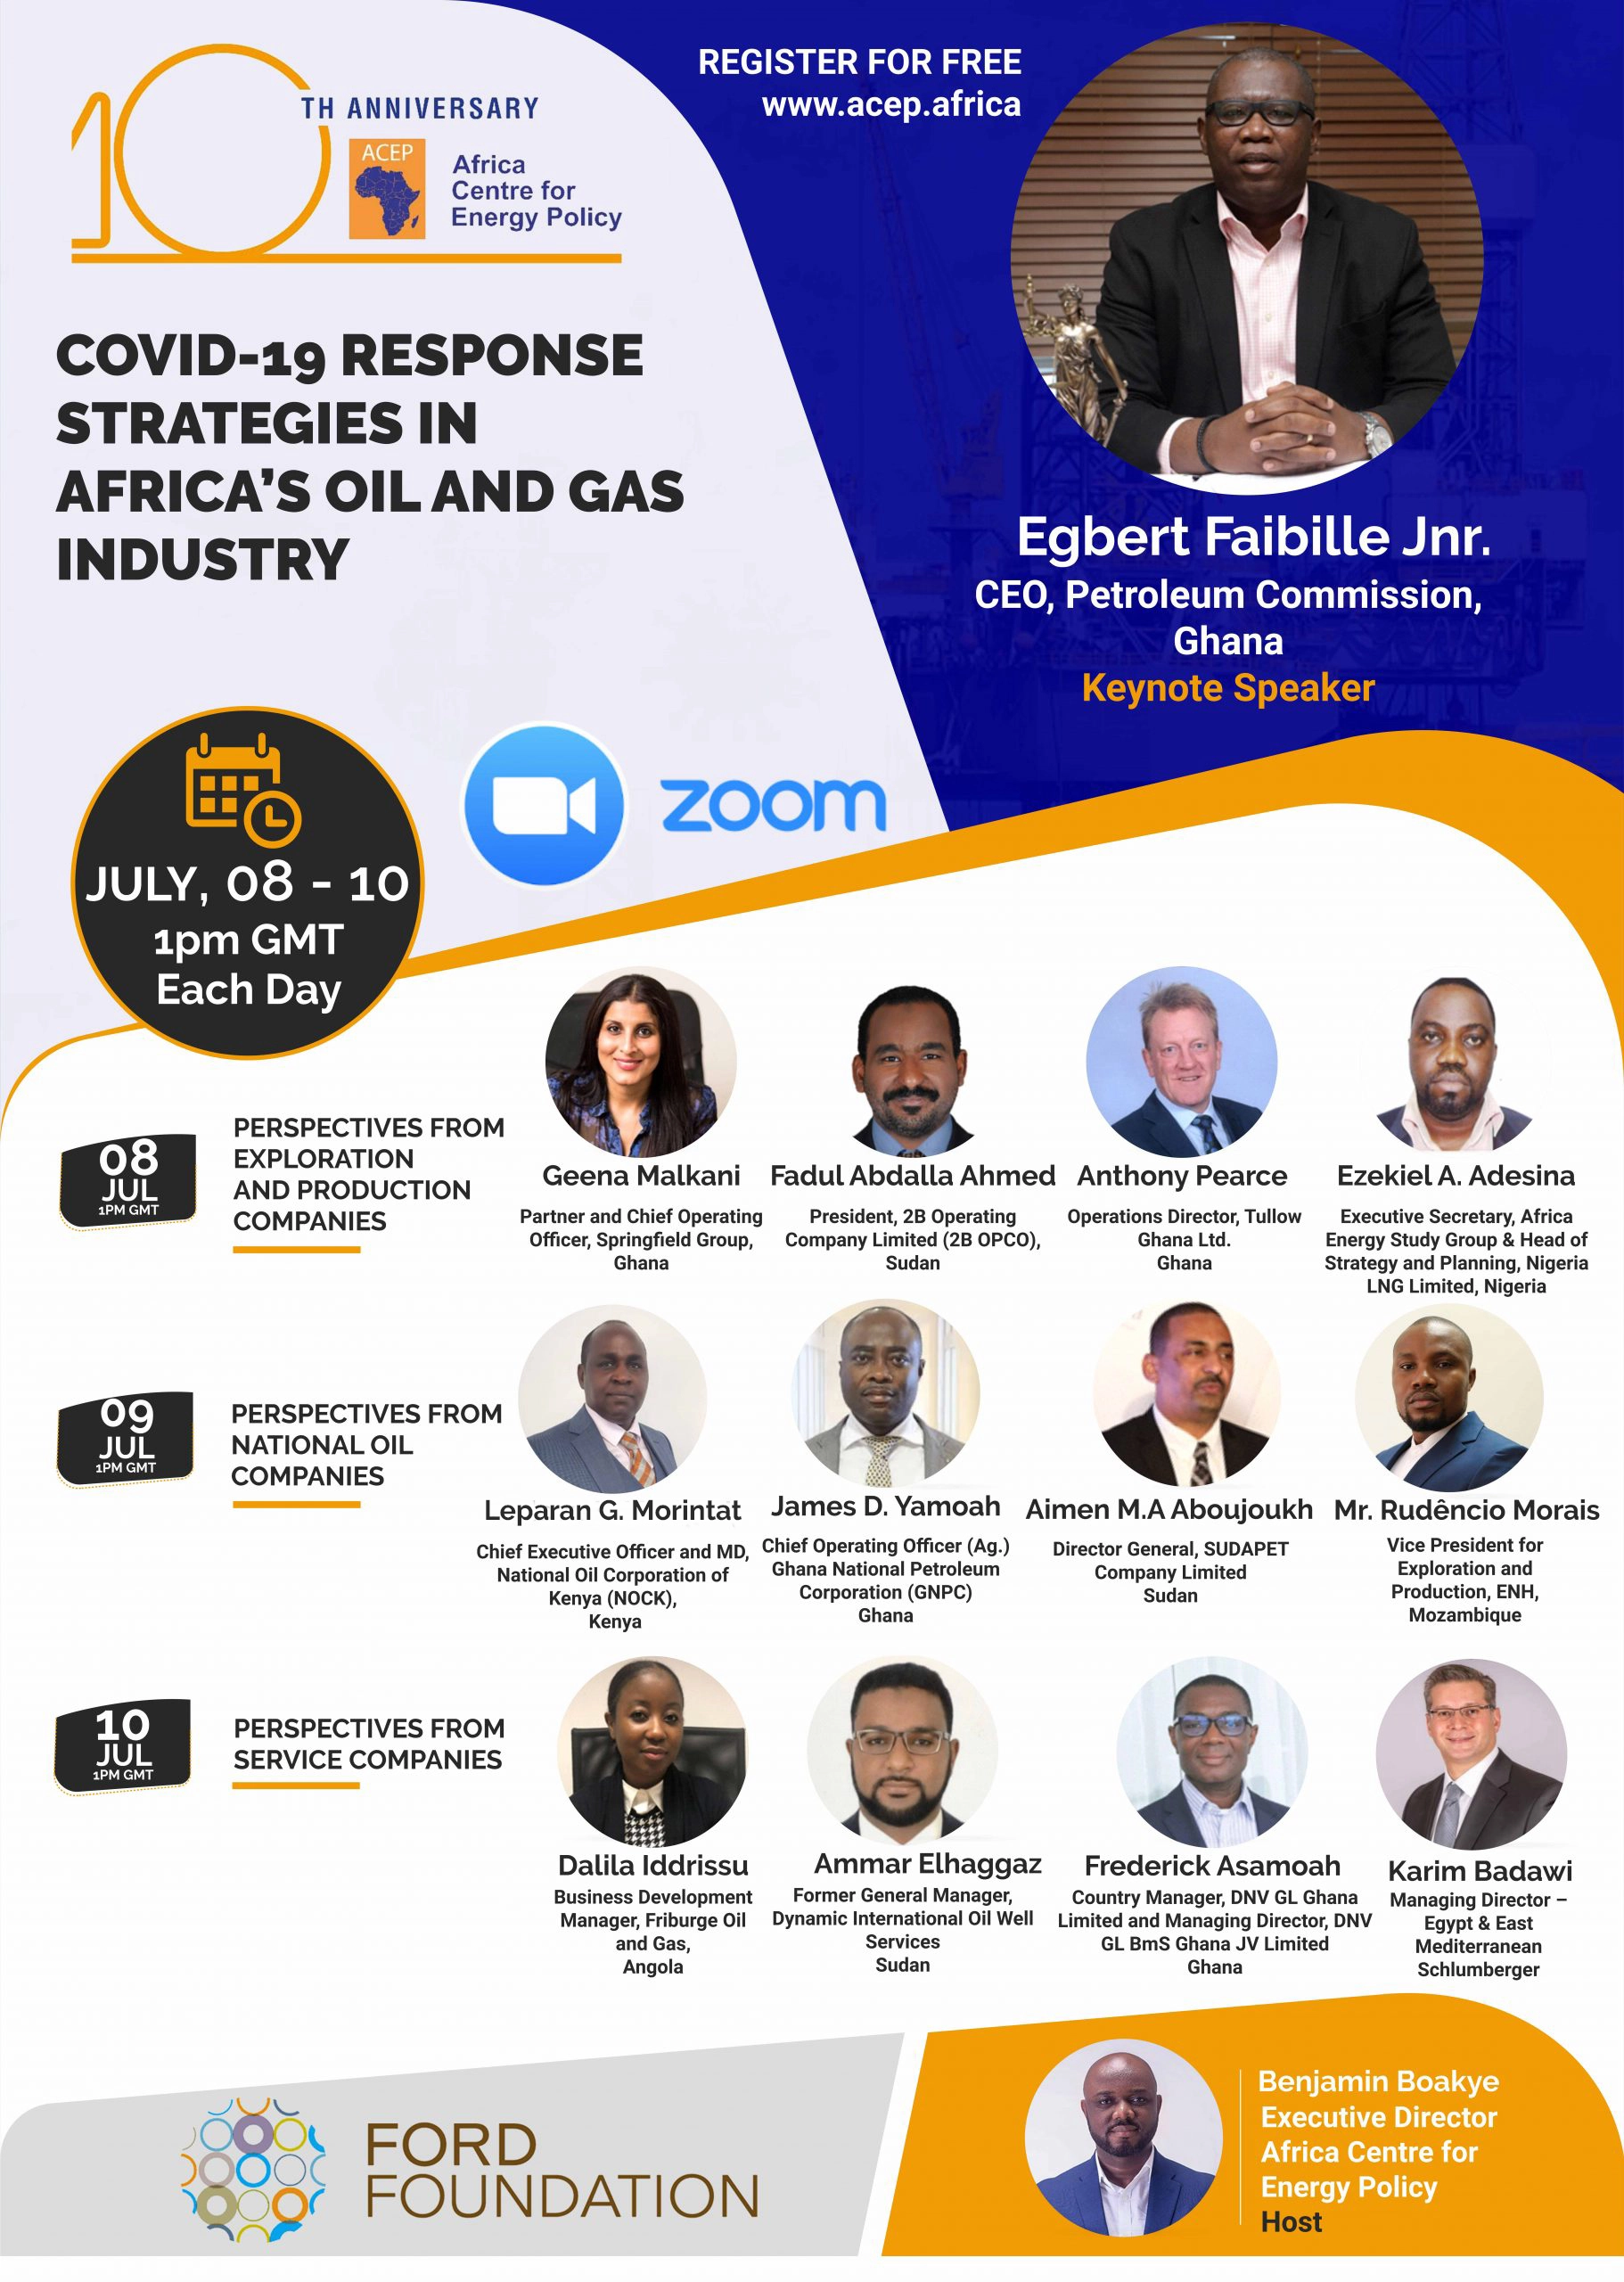 COVID-19 Response Strategies in Africa’s Oil and Gas Industry